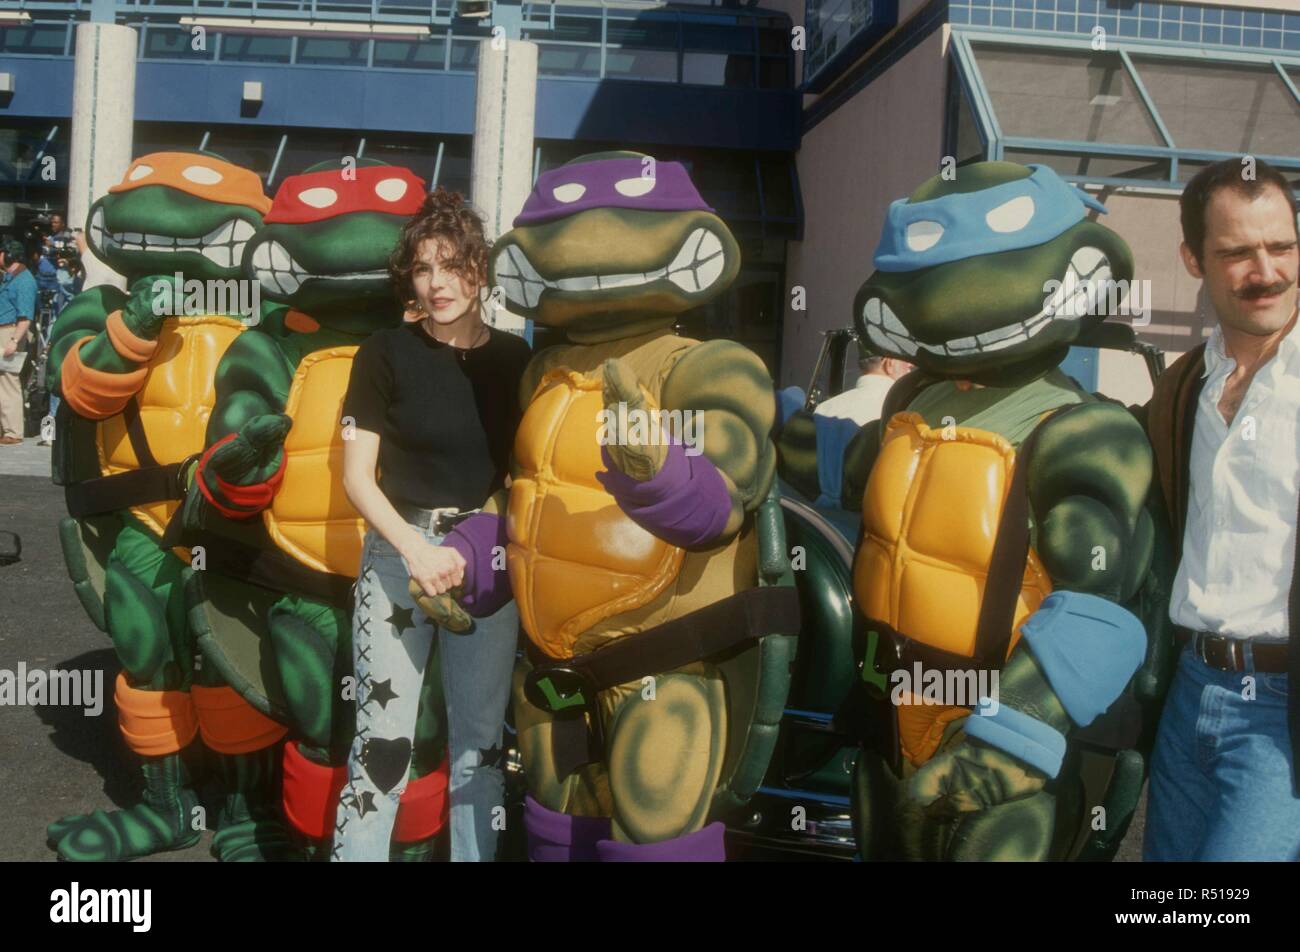 UNIVERSAL CITY, CA - MARCH 6: Actress Paige Turco and actor Elias Koteas attend 'Teenage Mutant Ninja Turtles III' Premiere on March 6, 1993 at Cineplex Odeon Cinema in Universal City, California. Photo by Barry King/Alamy Stock Photo Stock Photo